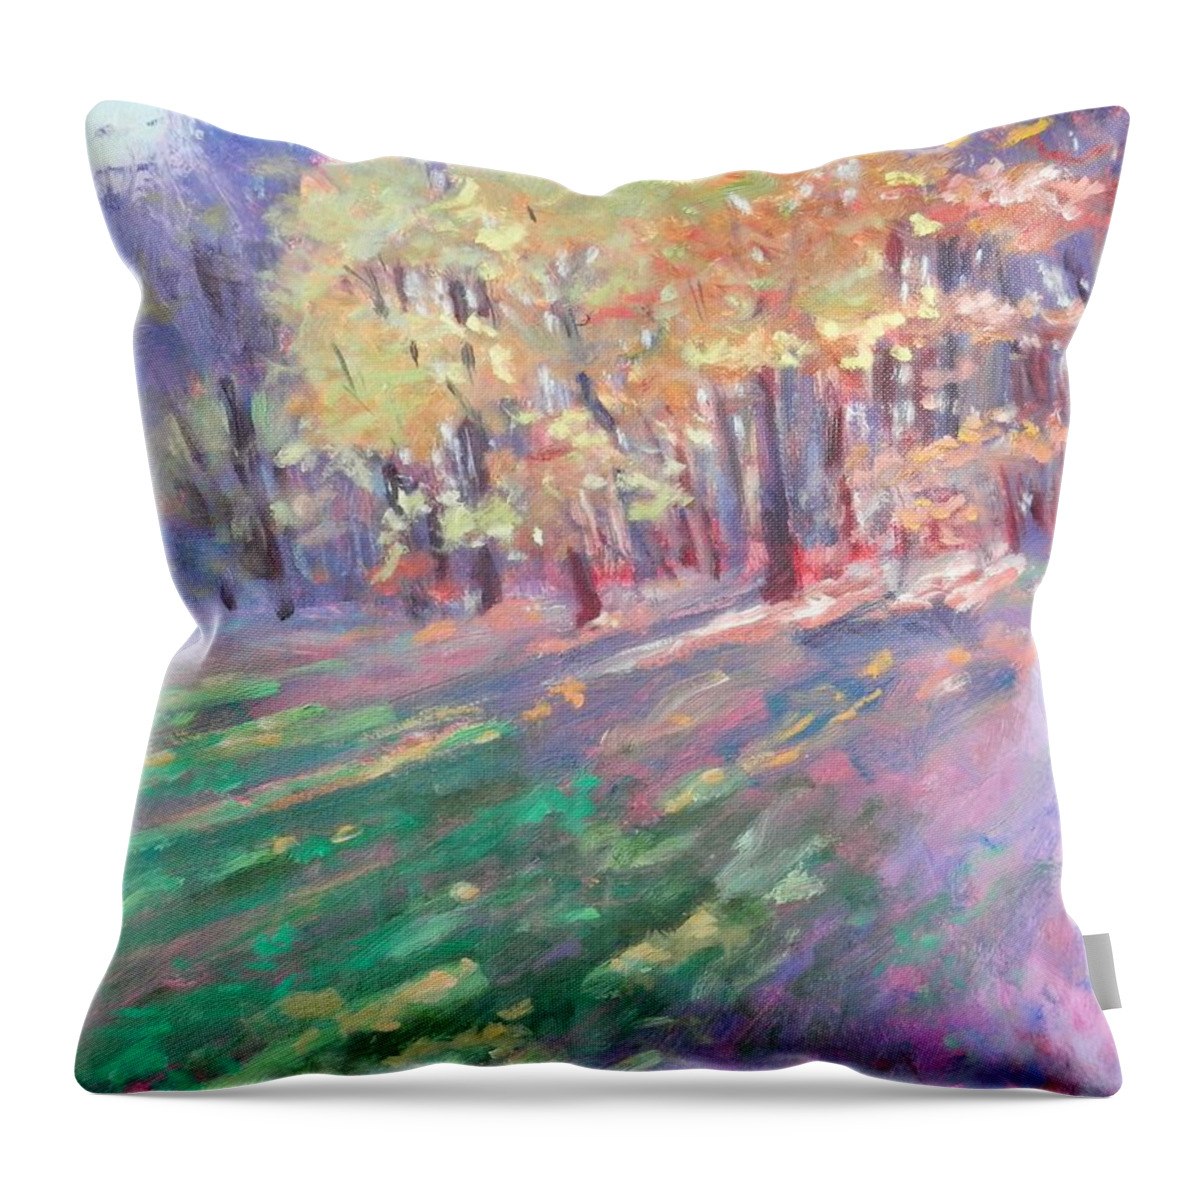 Glow; Autumn; Trees; Sun; Sunshine; Shadows; Fall; Abstract; Leaves; Foliage; Grass; Yellow; Orange; Blue; Green; Purple; Violet; Sky; Forest; Pennsylvania Throw Pillow featuring the painting Glow of Autumn by Michael Camp